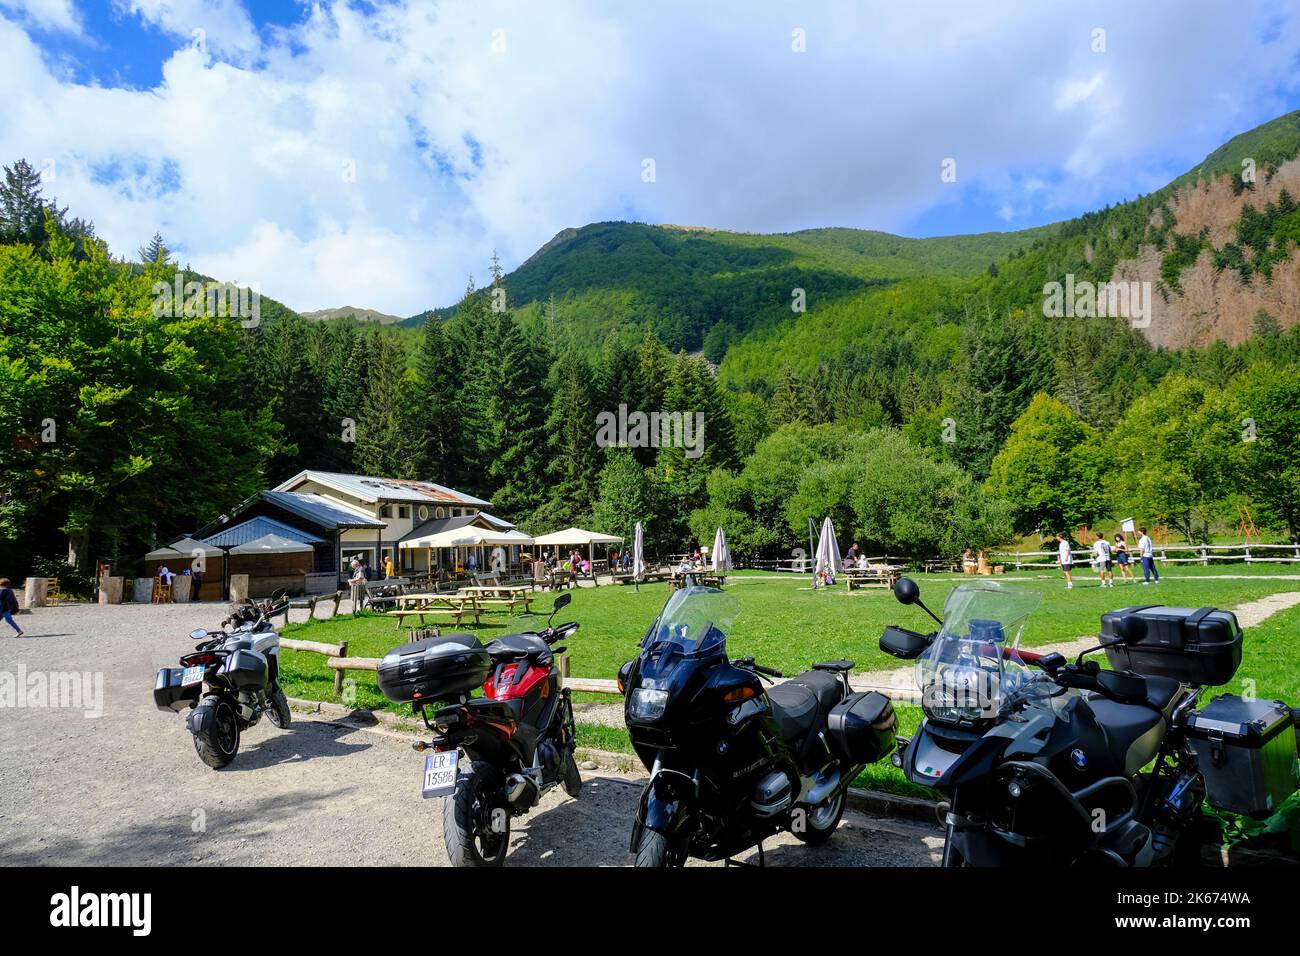 Shelter in the mountains with tourists across parked motorcycles. National park Appennino Tosco-Emiliano, Lagdei, Emilia-Romagna Stock Photo